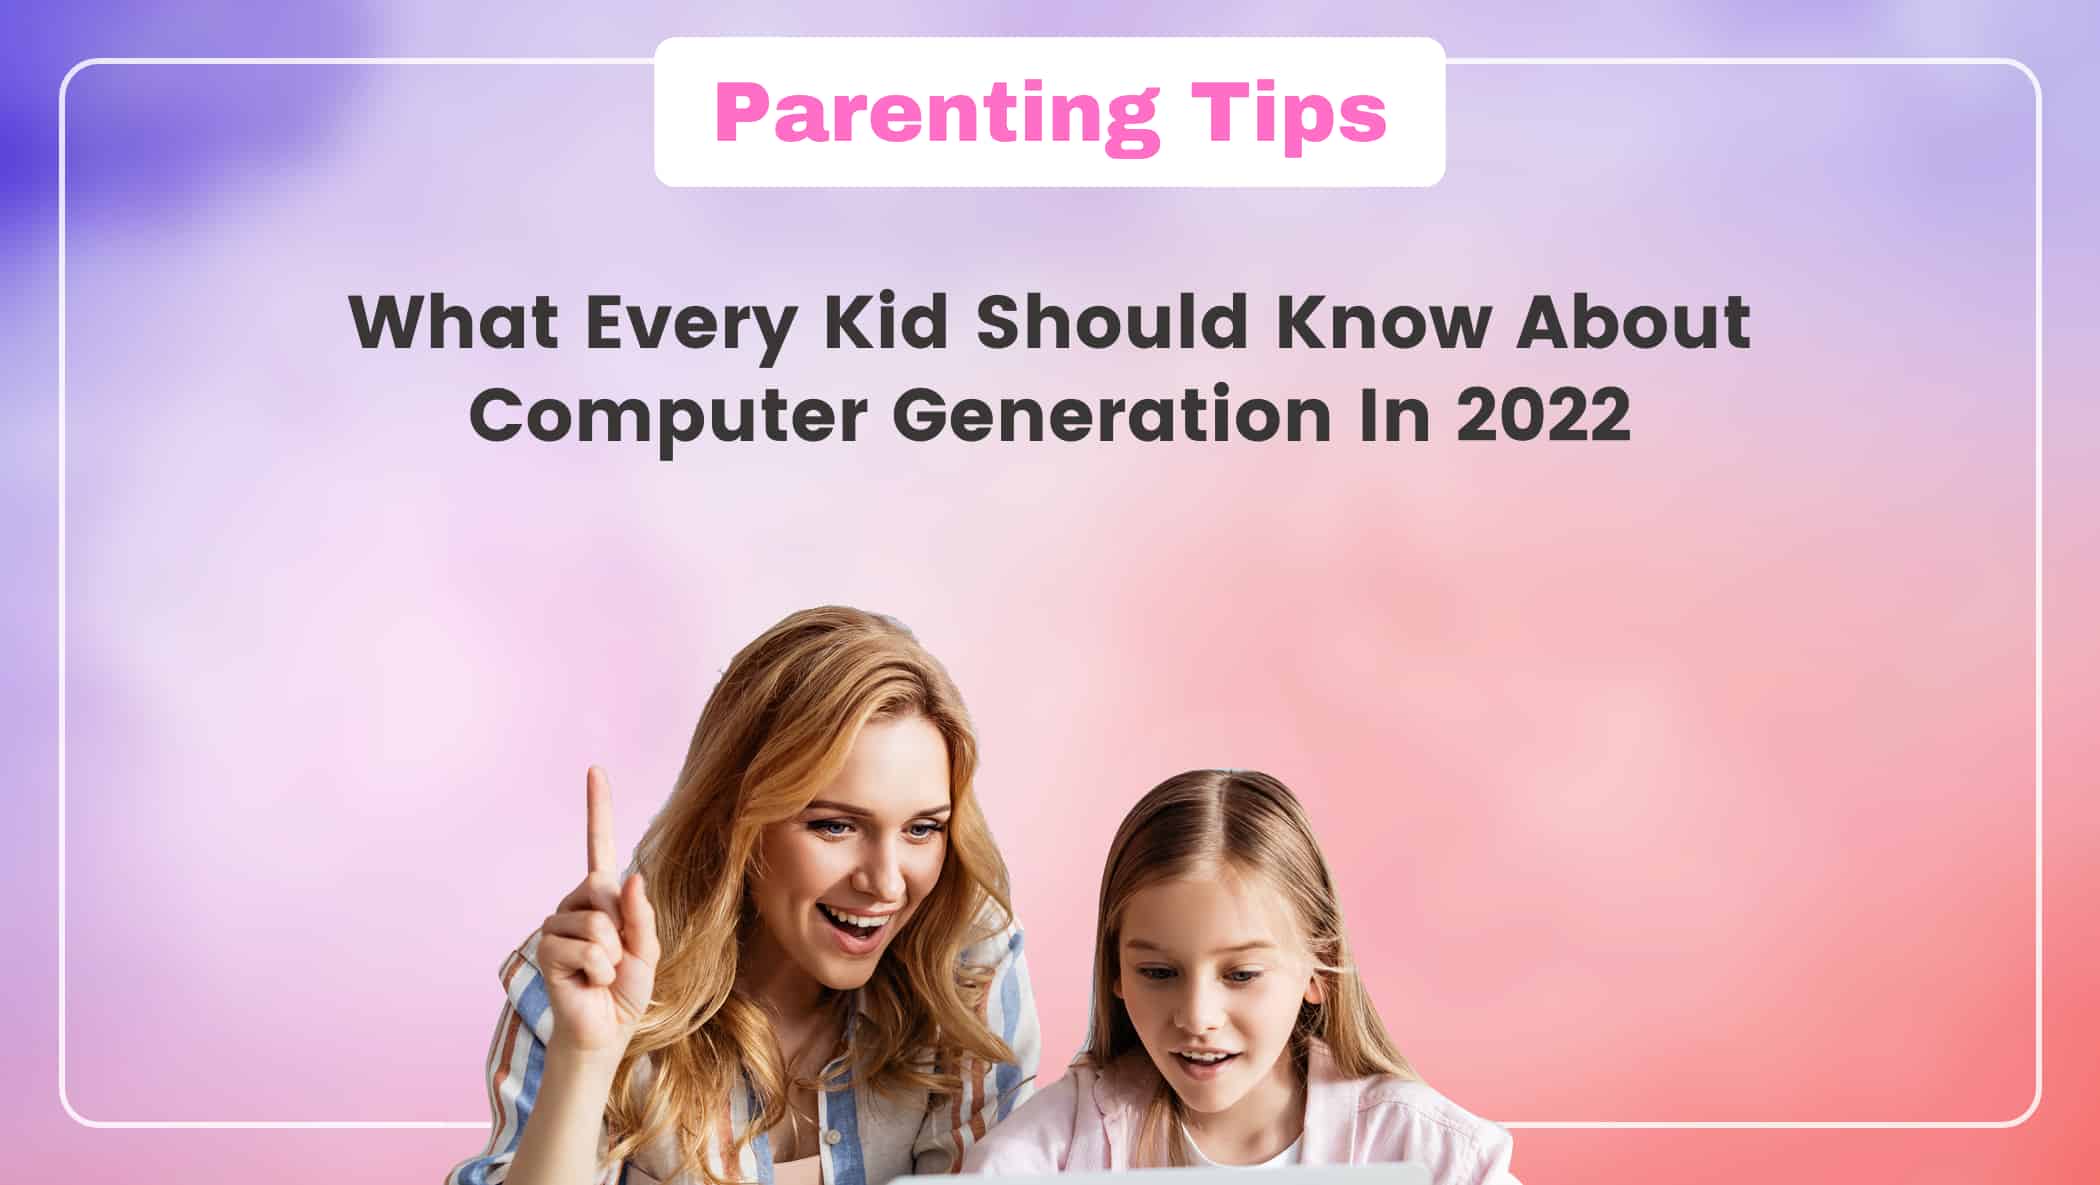 What Every Kid Should Know About Computer Generation In 2022 Image